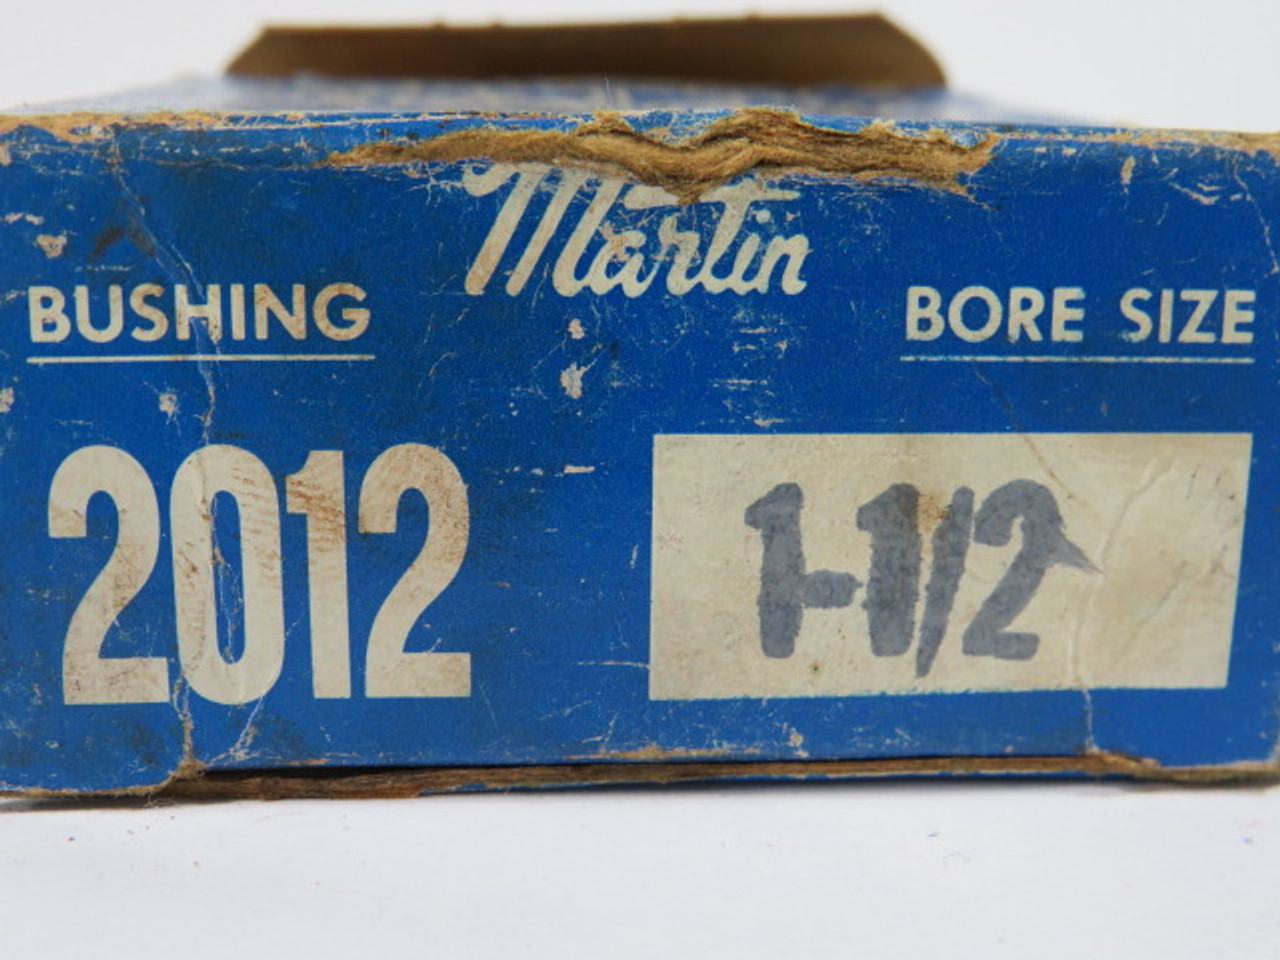 Martin 2012-1-1/2 Tapered Bushing 2-3/4" OD 1-1/2" Bore 1-1/4" LTB USED